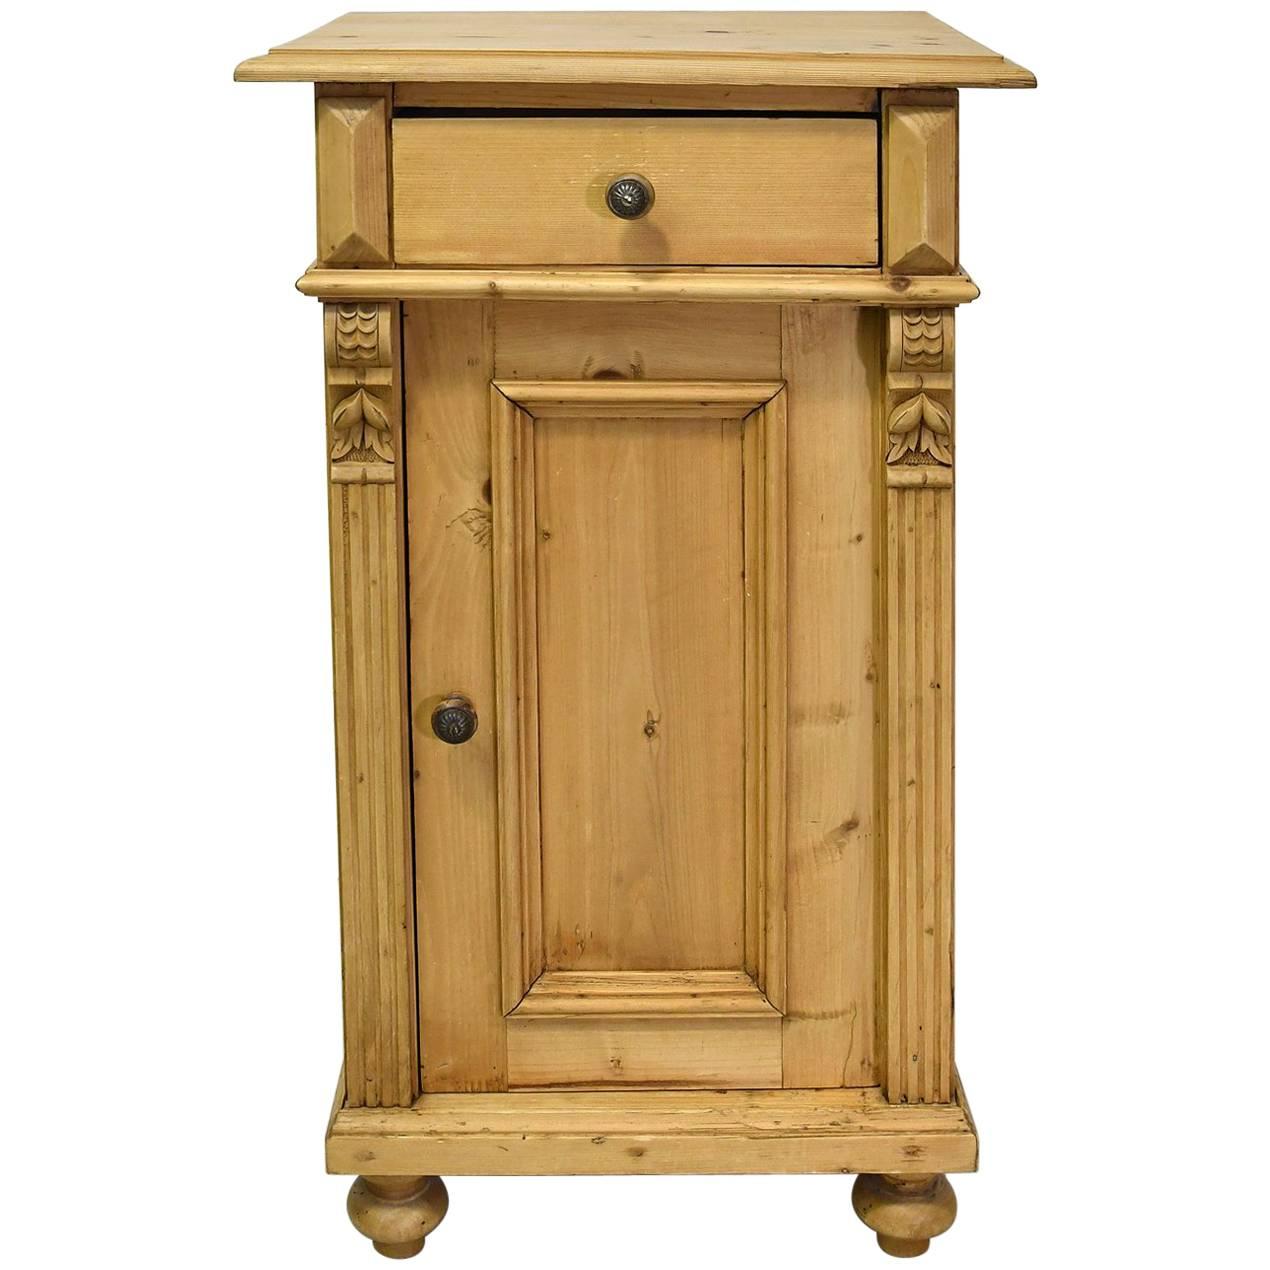 19th Century European Pine Nightstand with Carved Appliques and Fluted Pilasters